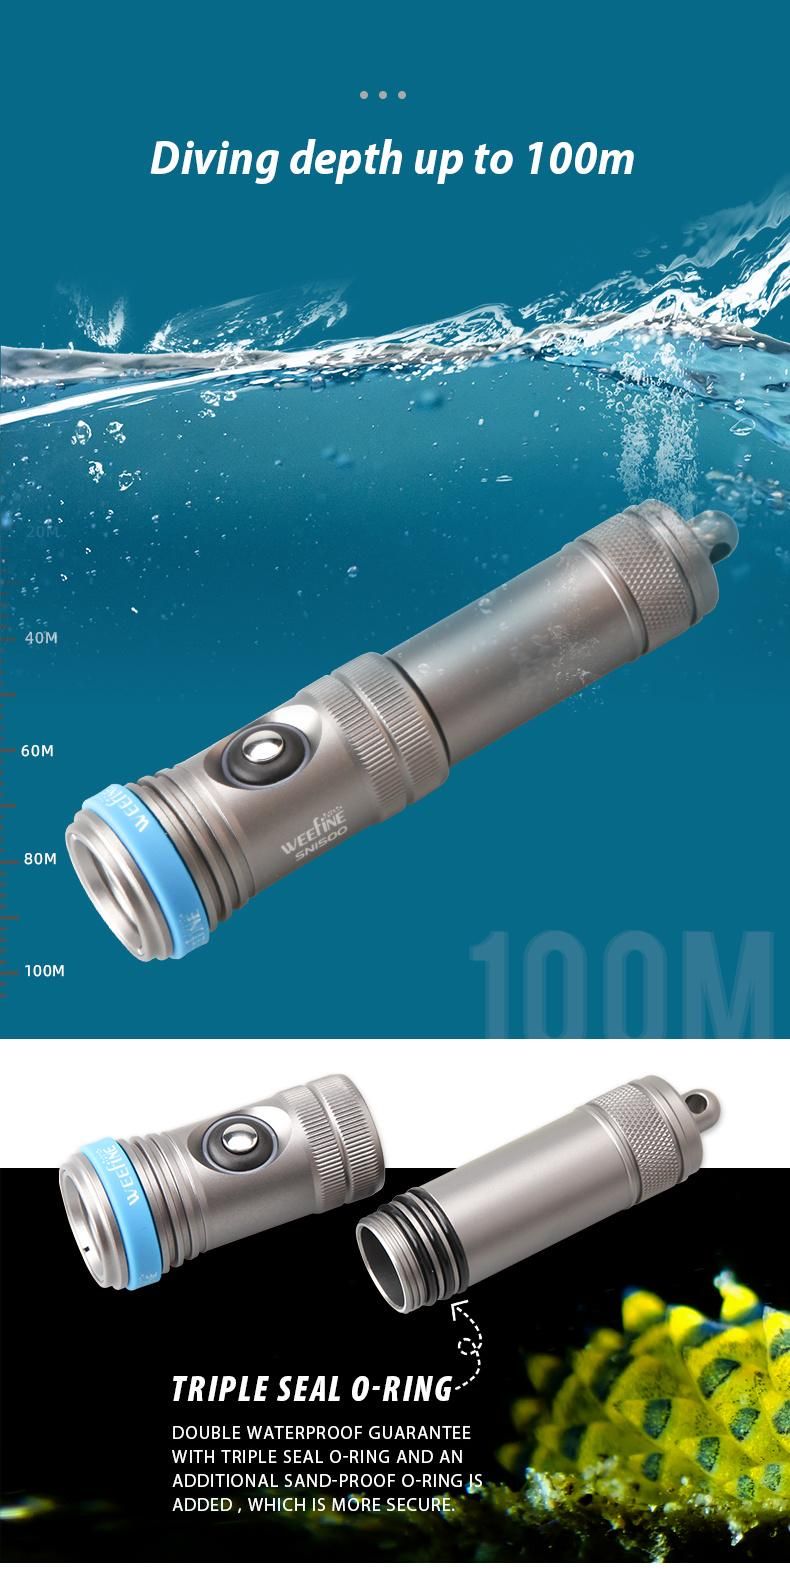 Impact-Resistant, and Lightweight Dive Torch with Top Grade Aluminum Casing, Resist Rust and Corrosion